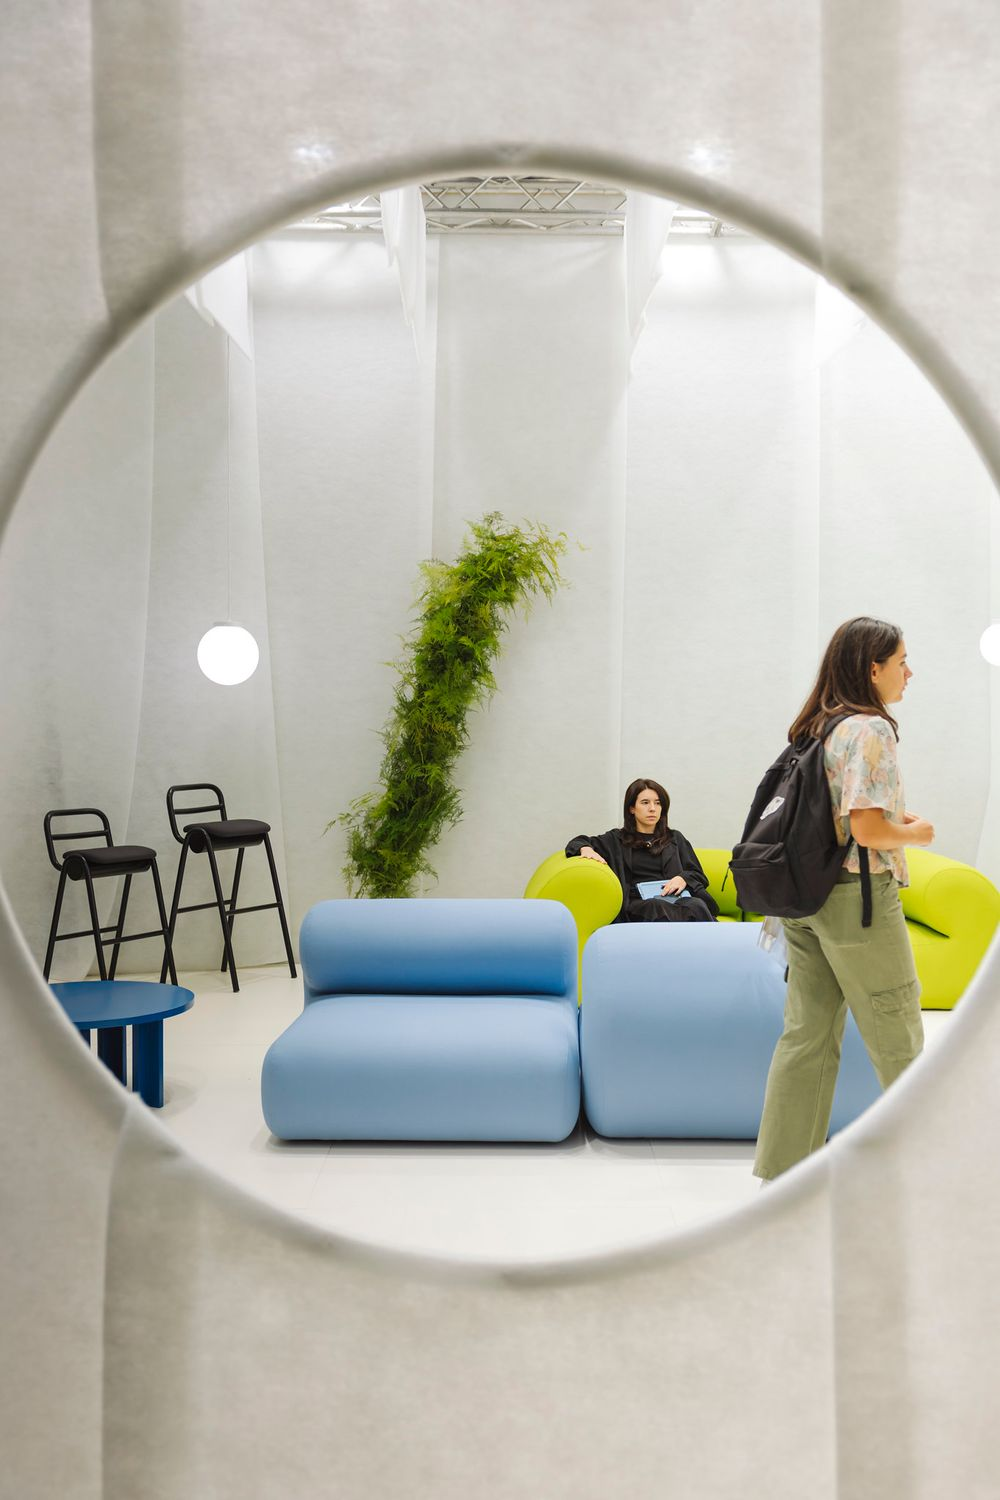 Michelin modular system (in avocado green and light blue) by MUT Design. Images of Habitat Valencia Fai